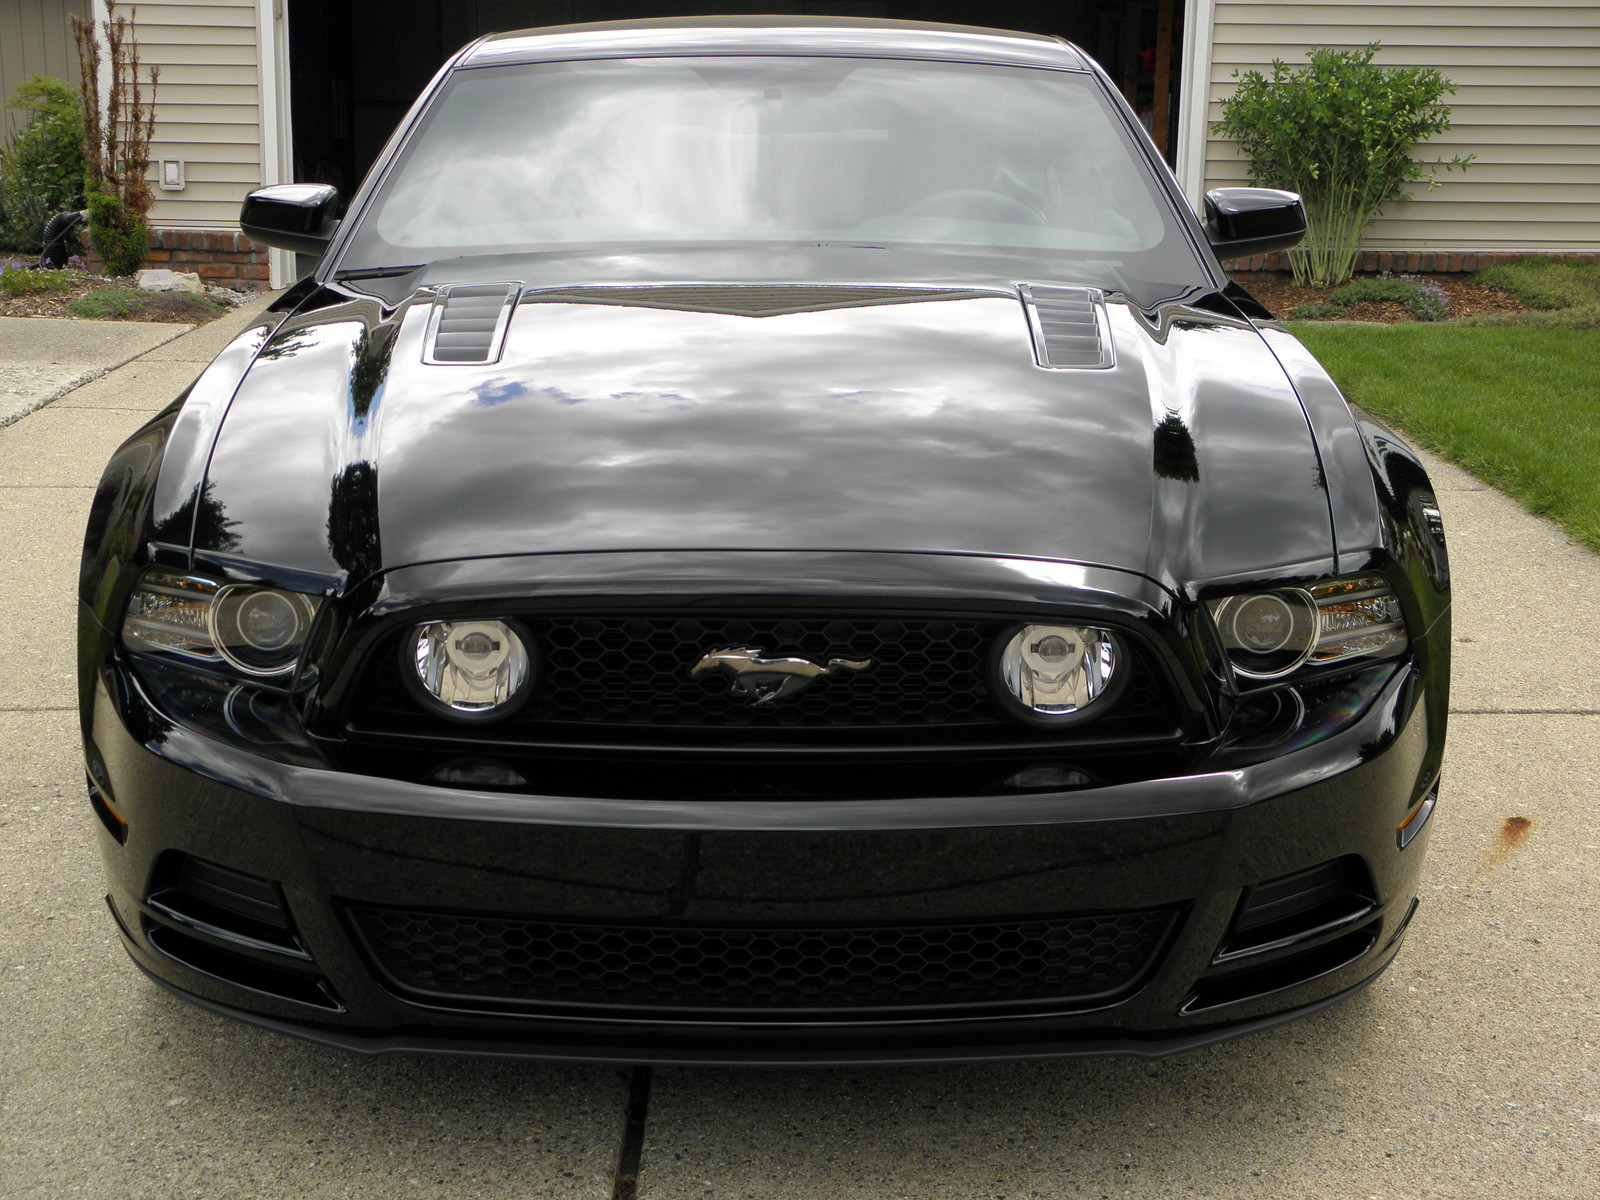 Ford mustang 1 4 mile times #5